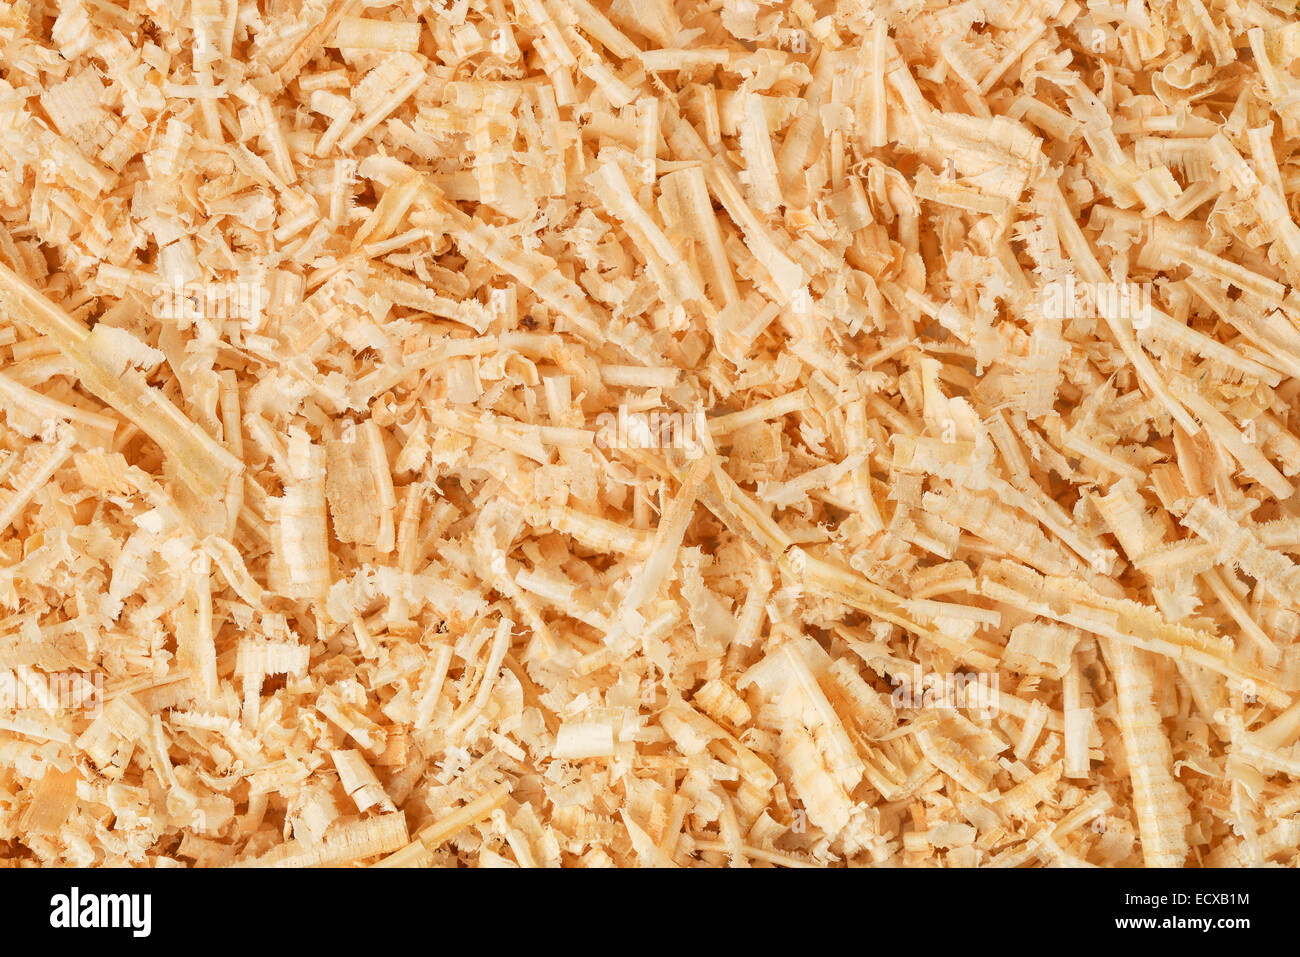 Background of wooden shavings and sawdust Stock Photo